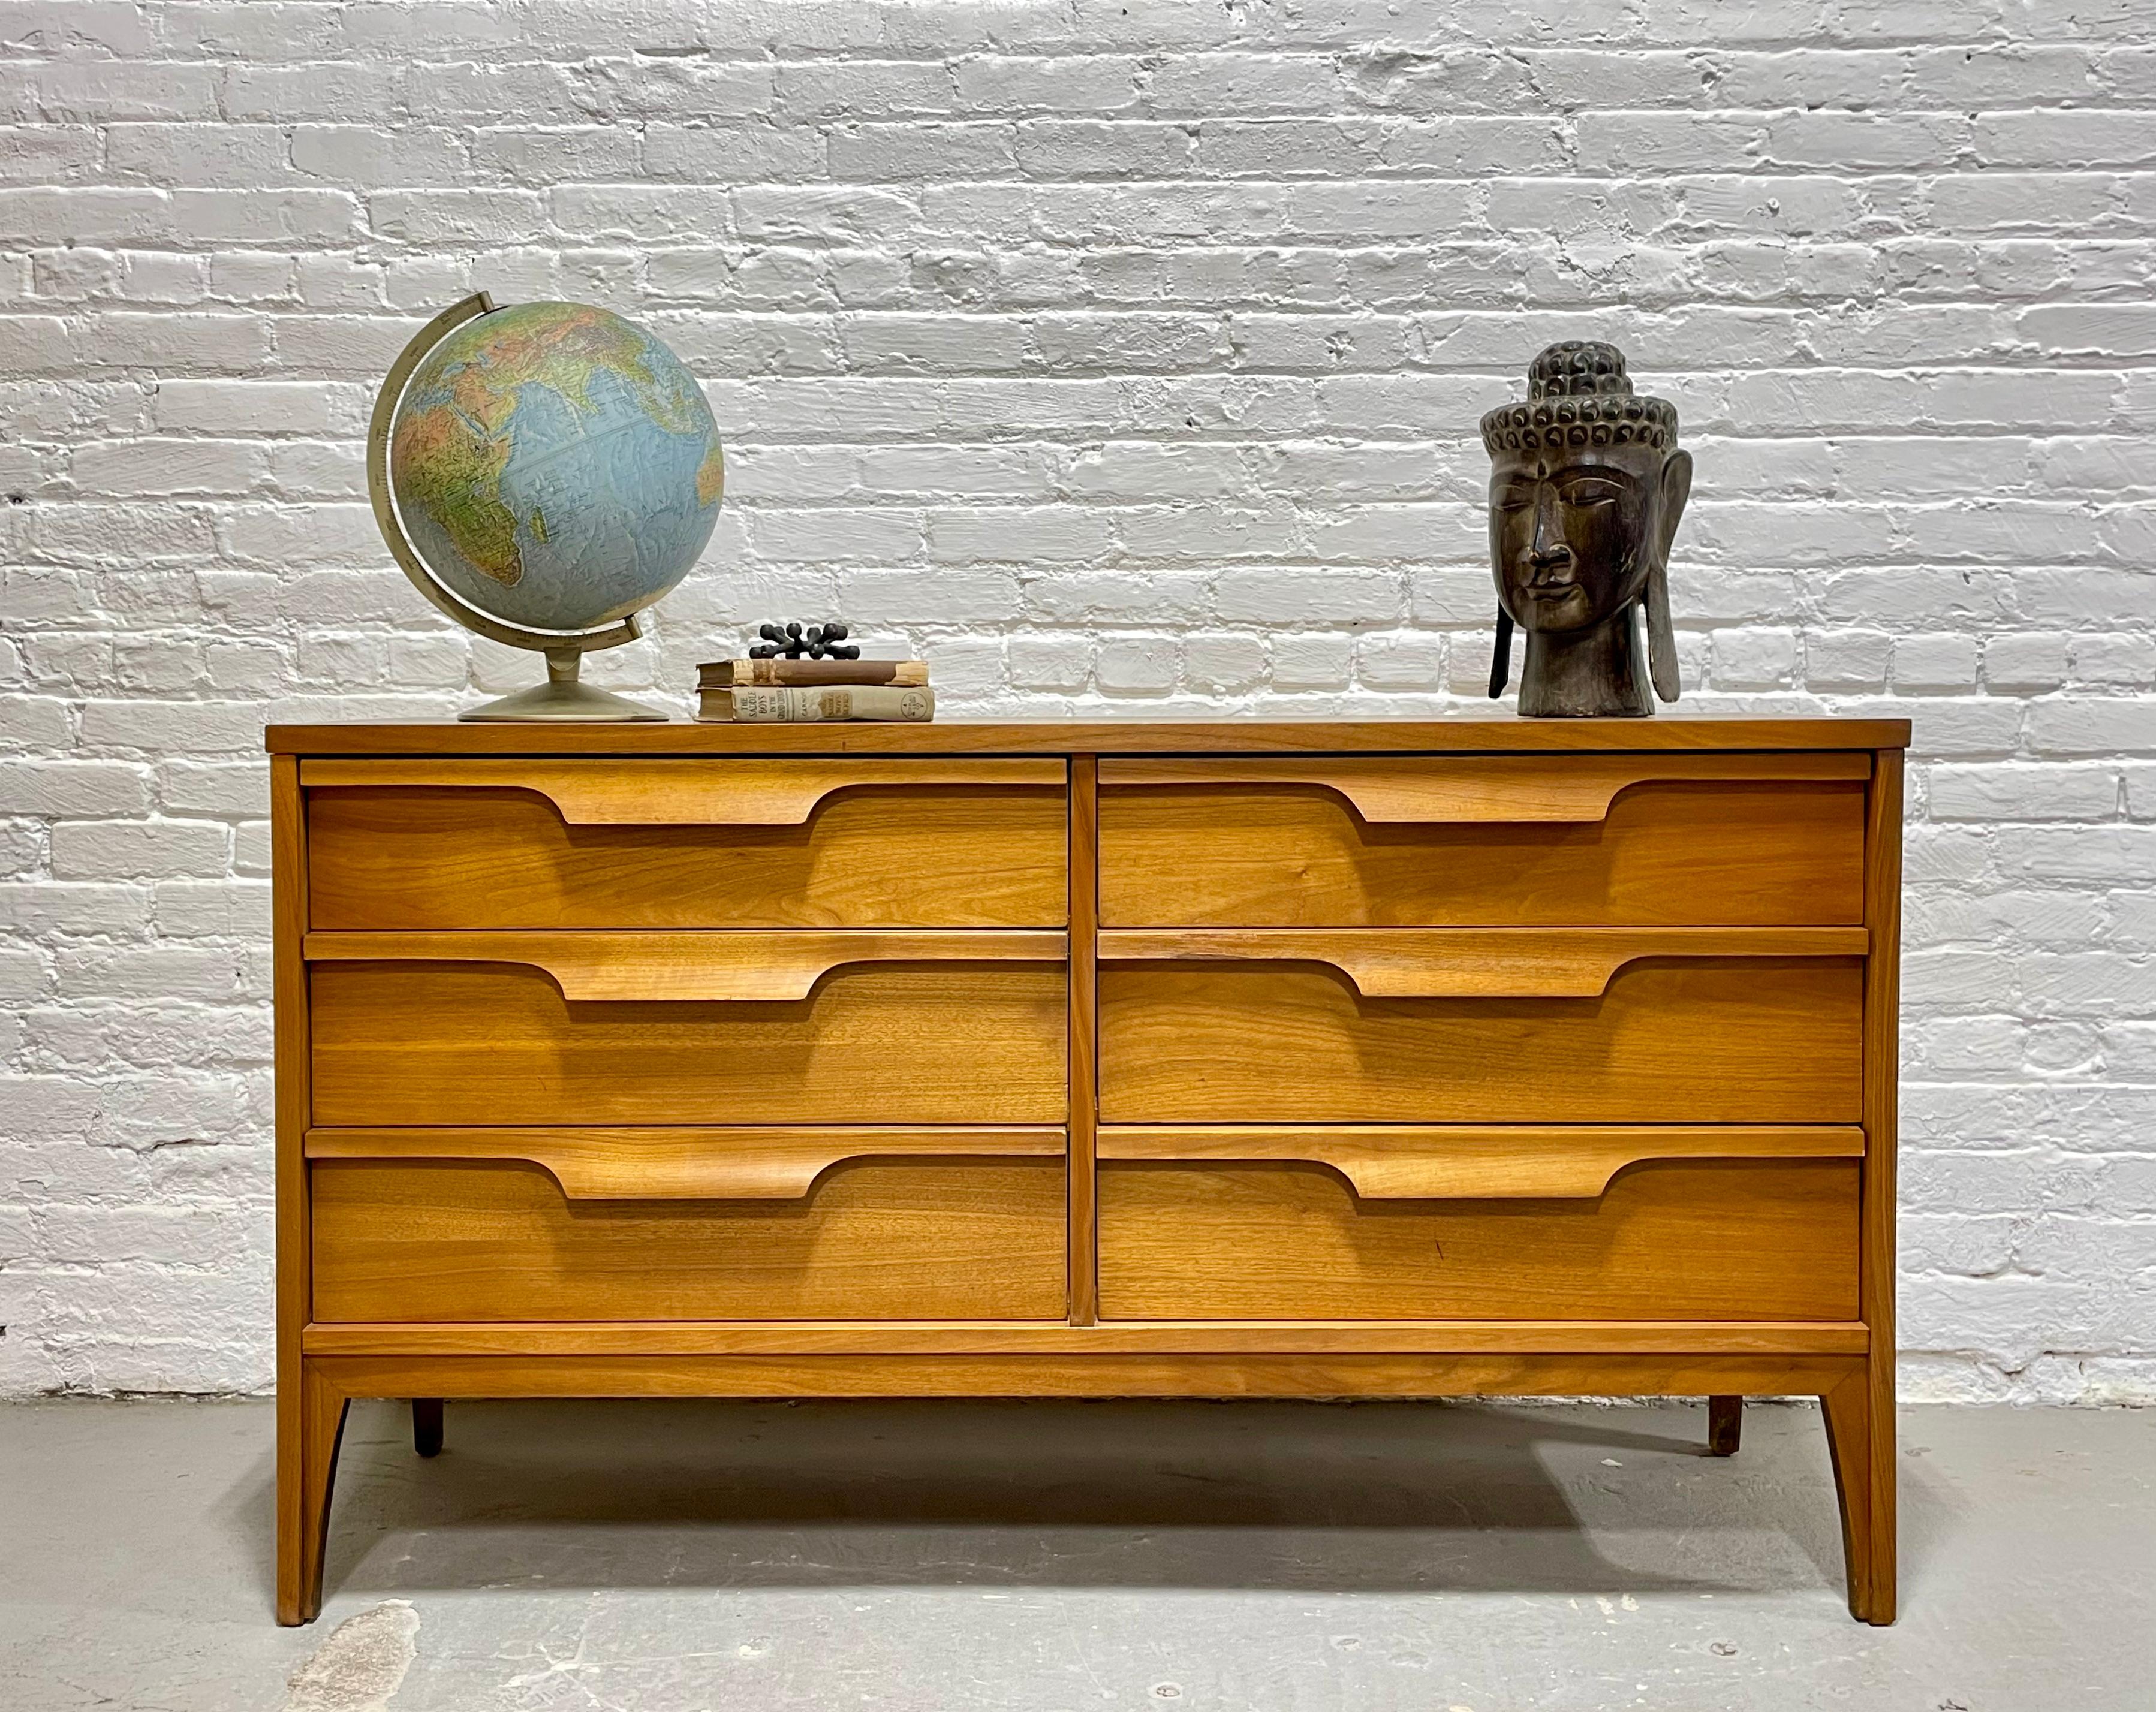 Mid Century Modern Sculpted Long Dresser / Credenza by Johnson Carper., c. 1960's.  Beautiful architectural detailing with sculpted drawers. Six spacious dovetailed drawers offer plenty of storage space. Laminated scratch-resistant woodgrain